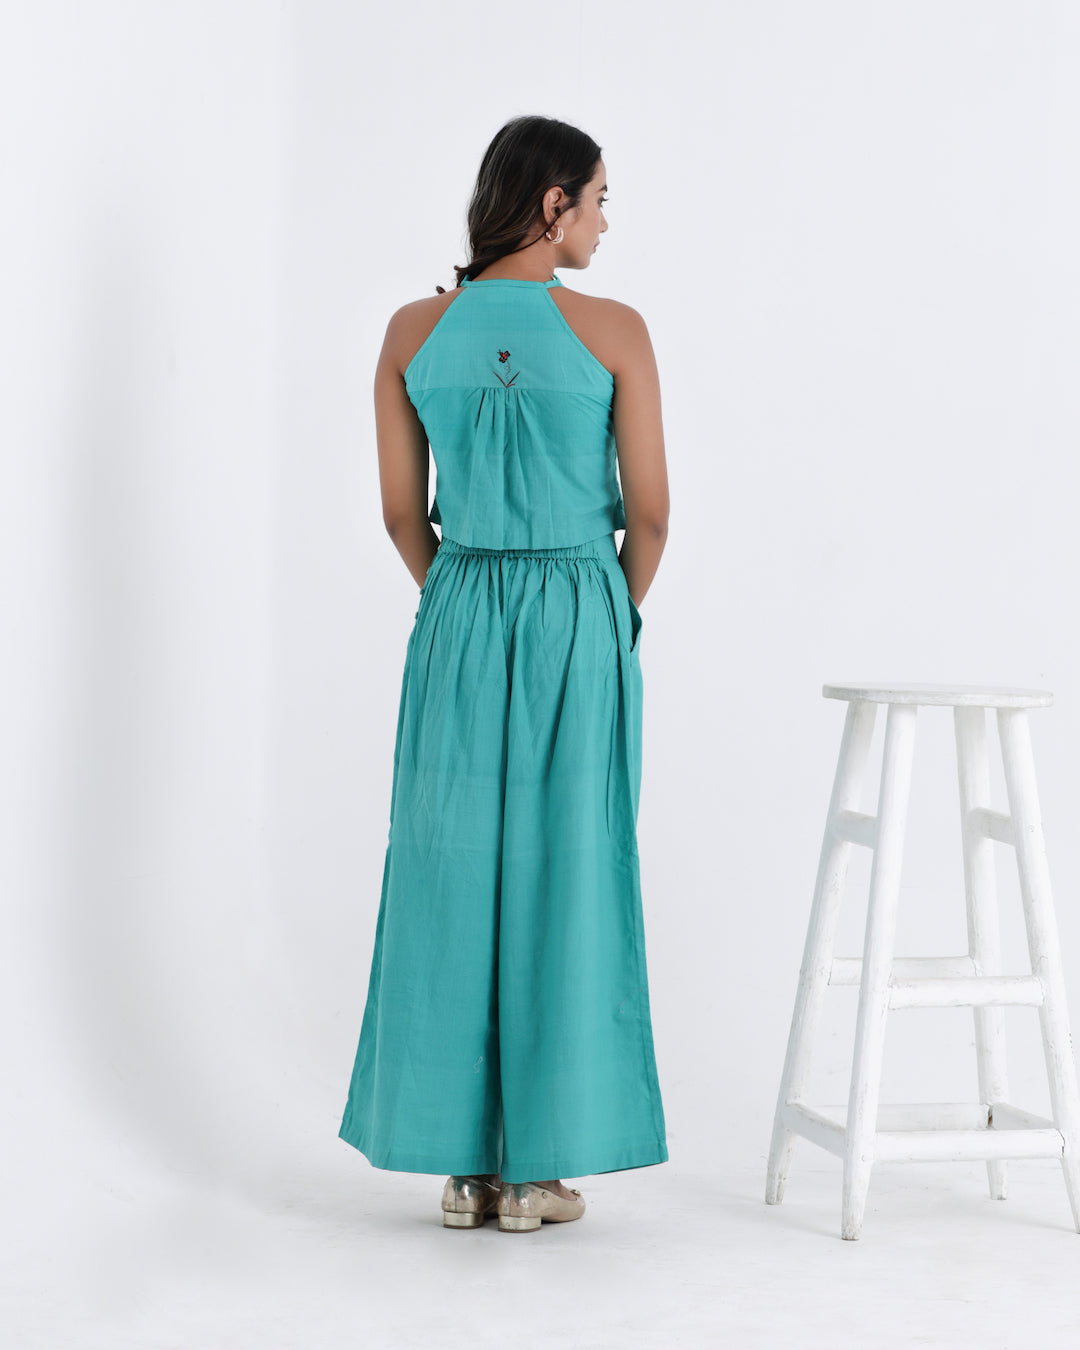 Shop Teal green cotton co-ord set